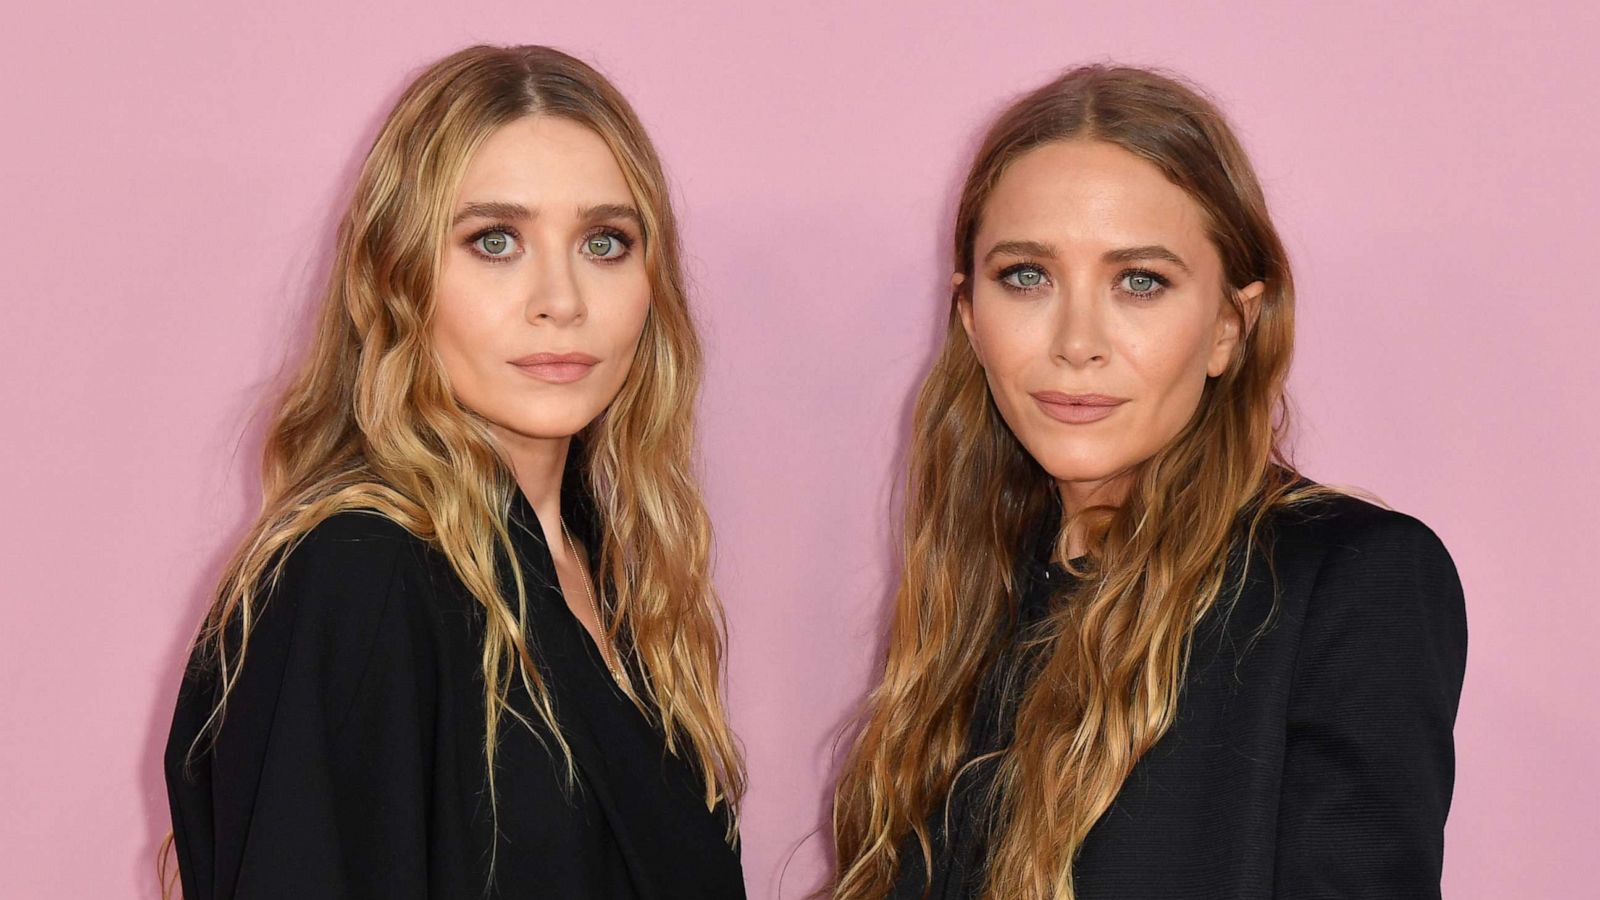 Mary-Kate And Ashley Olsen Interview: 'Discreet' Lives, The Row | lupon ...